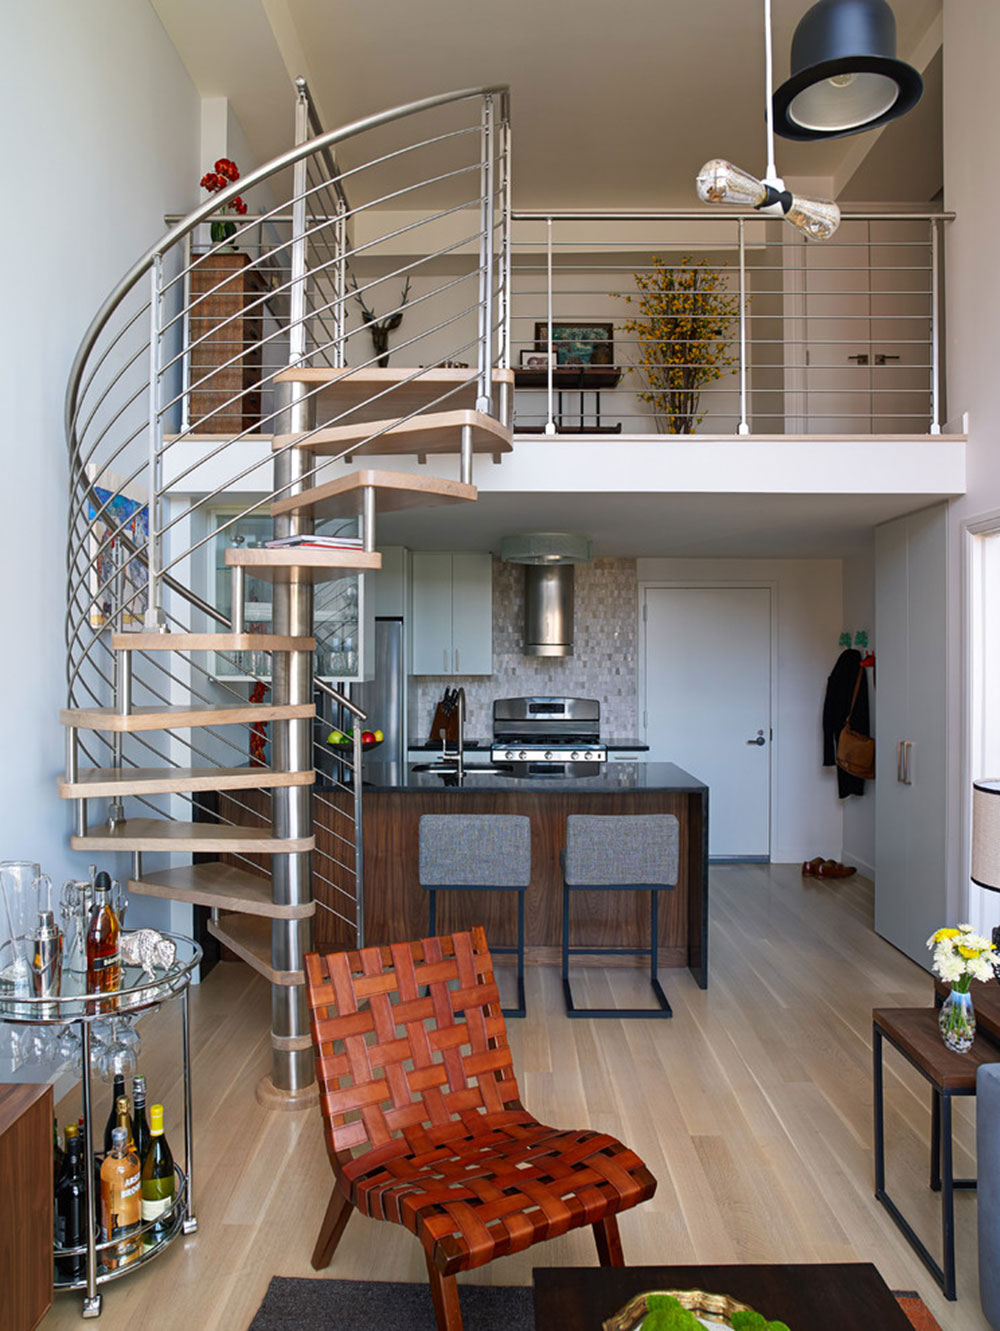 Urban-retreat-by-EDGE-Design-LLC Spiral Staircase Pictures and Things You Should Know About Them